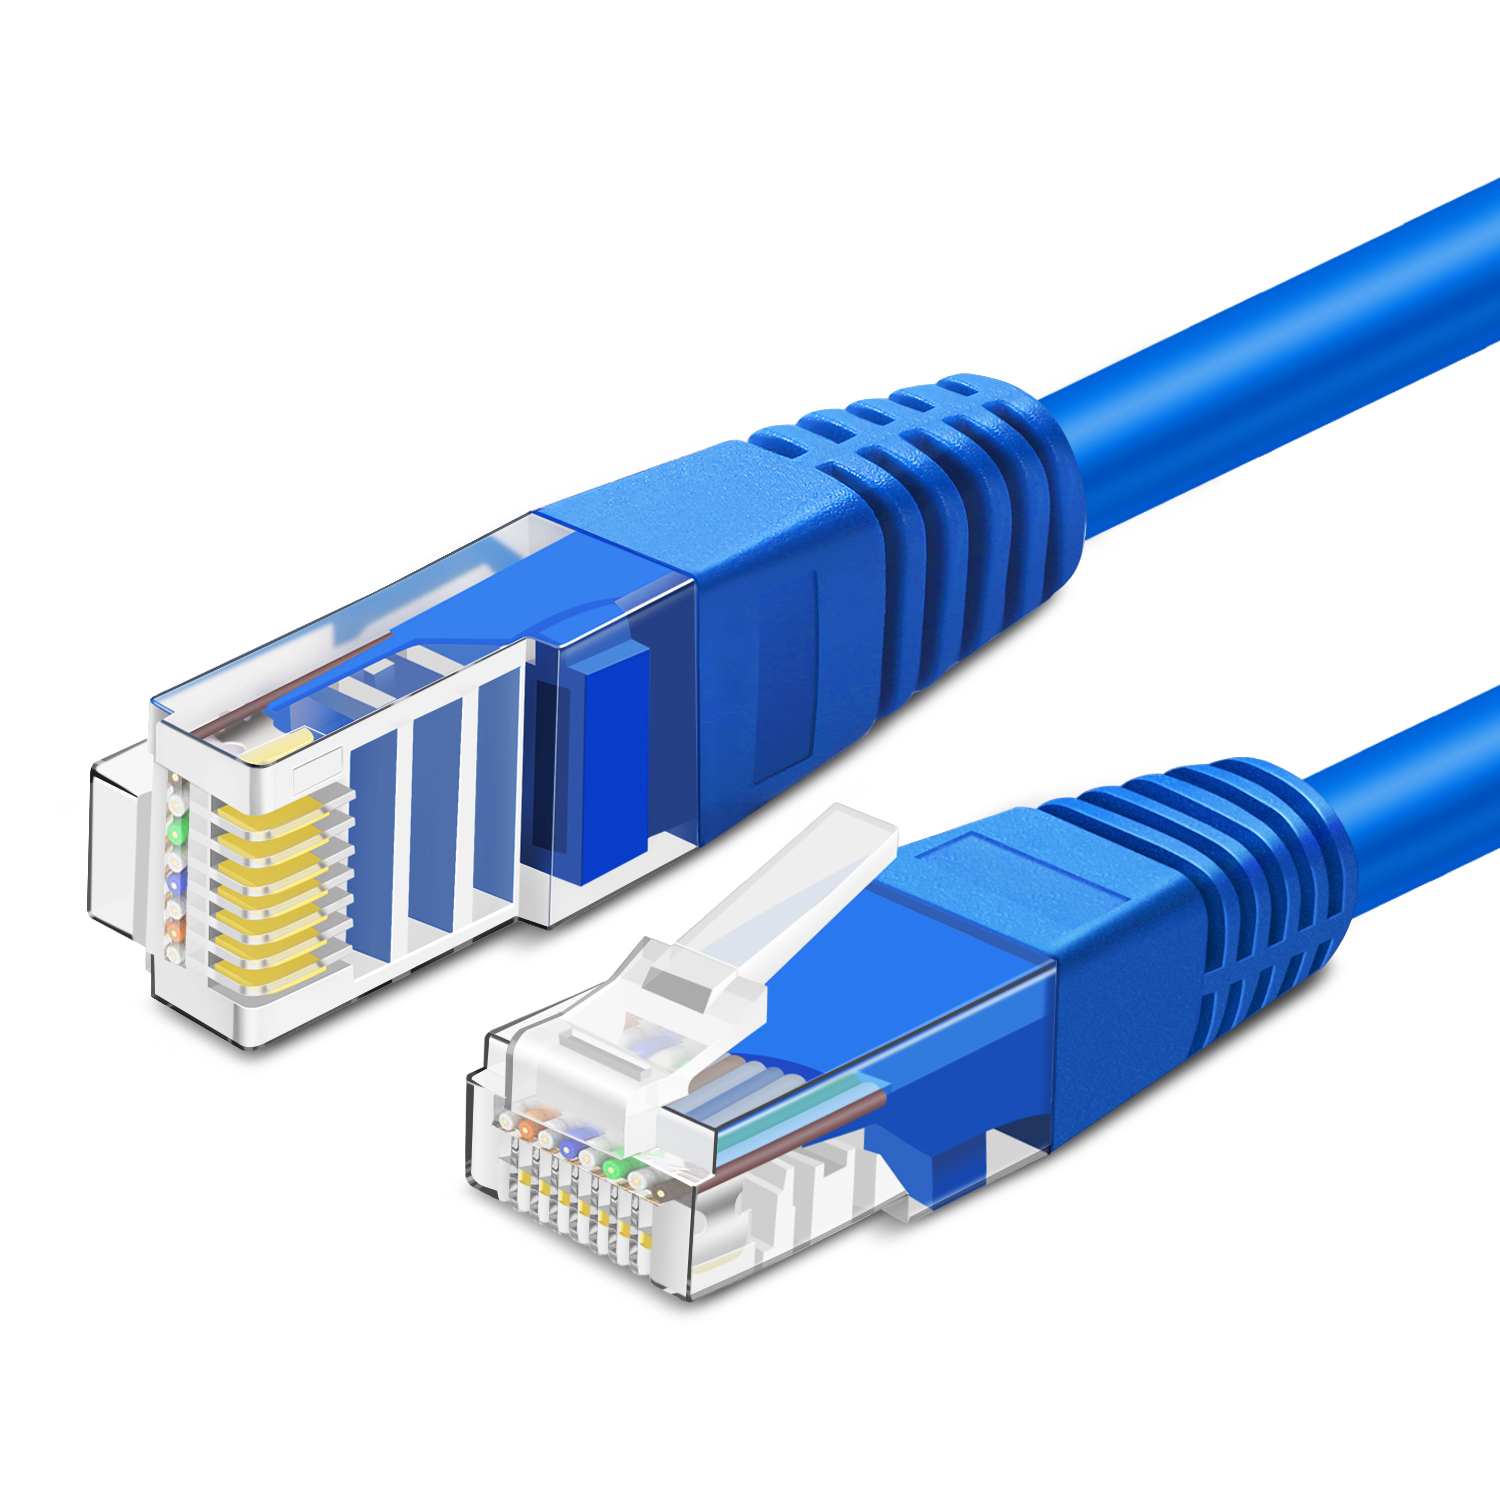 Cat 5e Ethernet Cable 10ft, Cat 5 Internet Patch Cable Cat5e Cable RJ45 Connector LAN Network Cable Cat5 Wire Patch Cord Snagless Computer Ether Wire (10 Foot Blue)